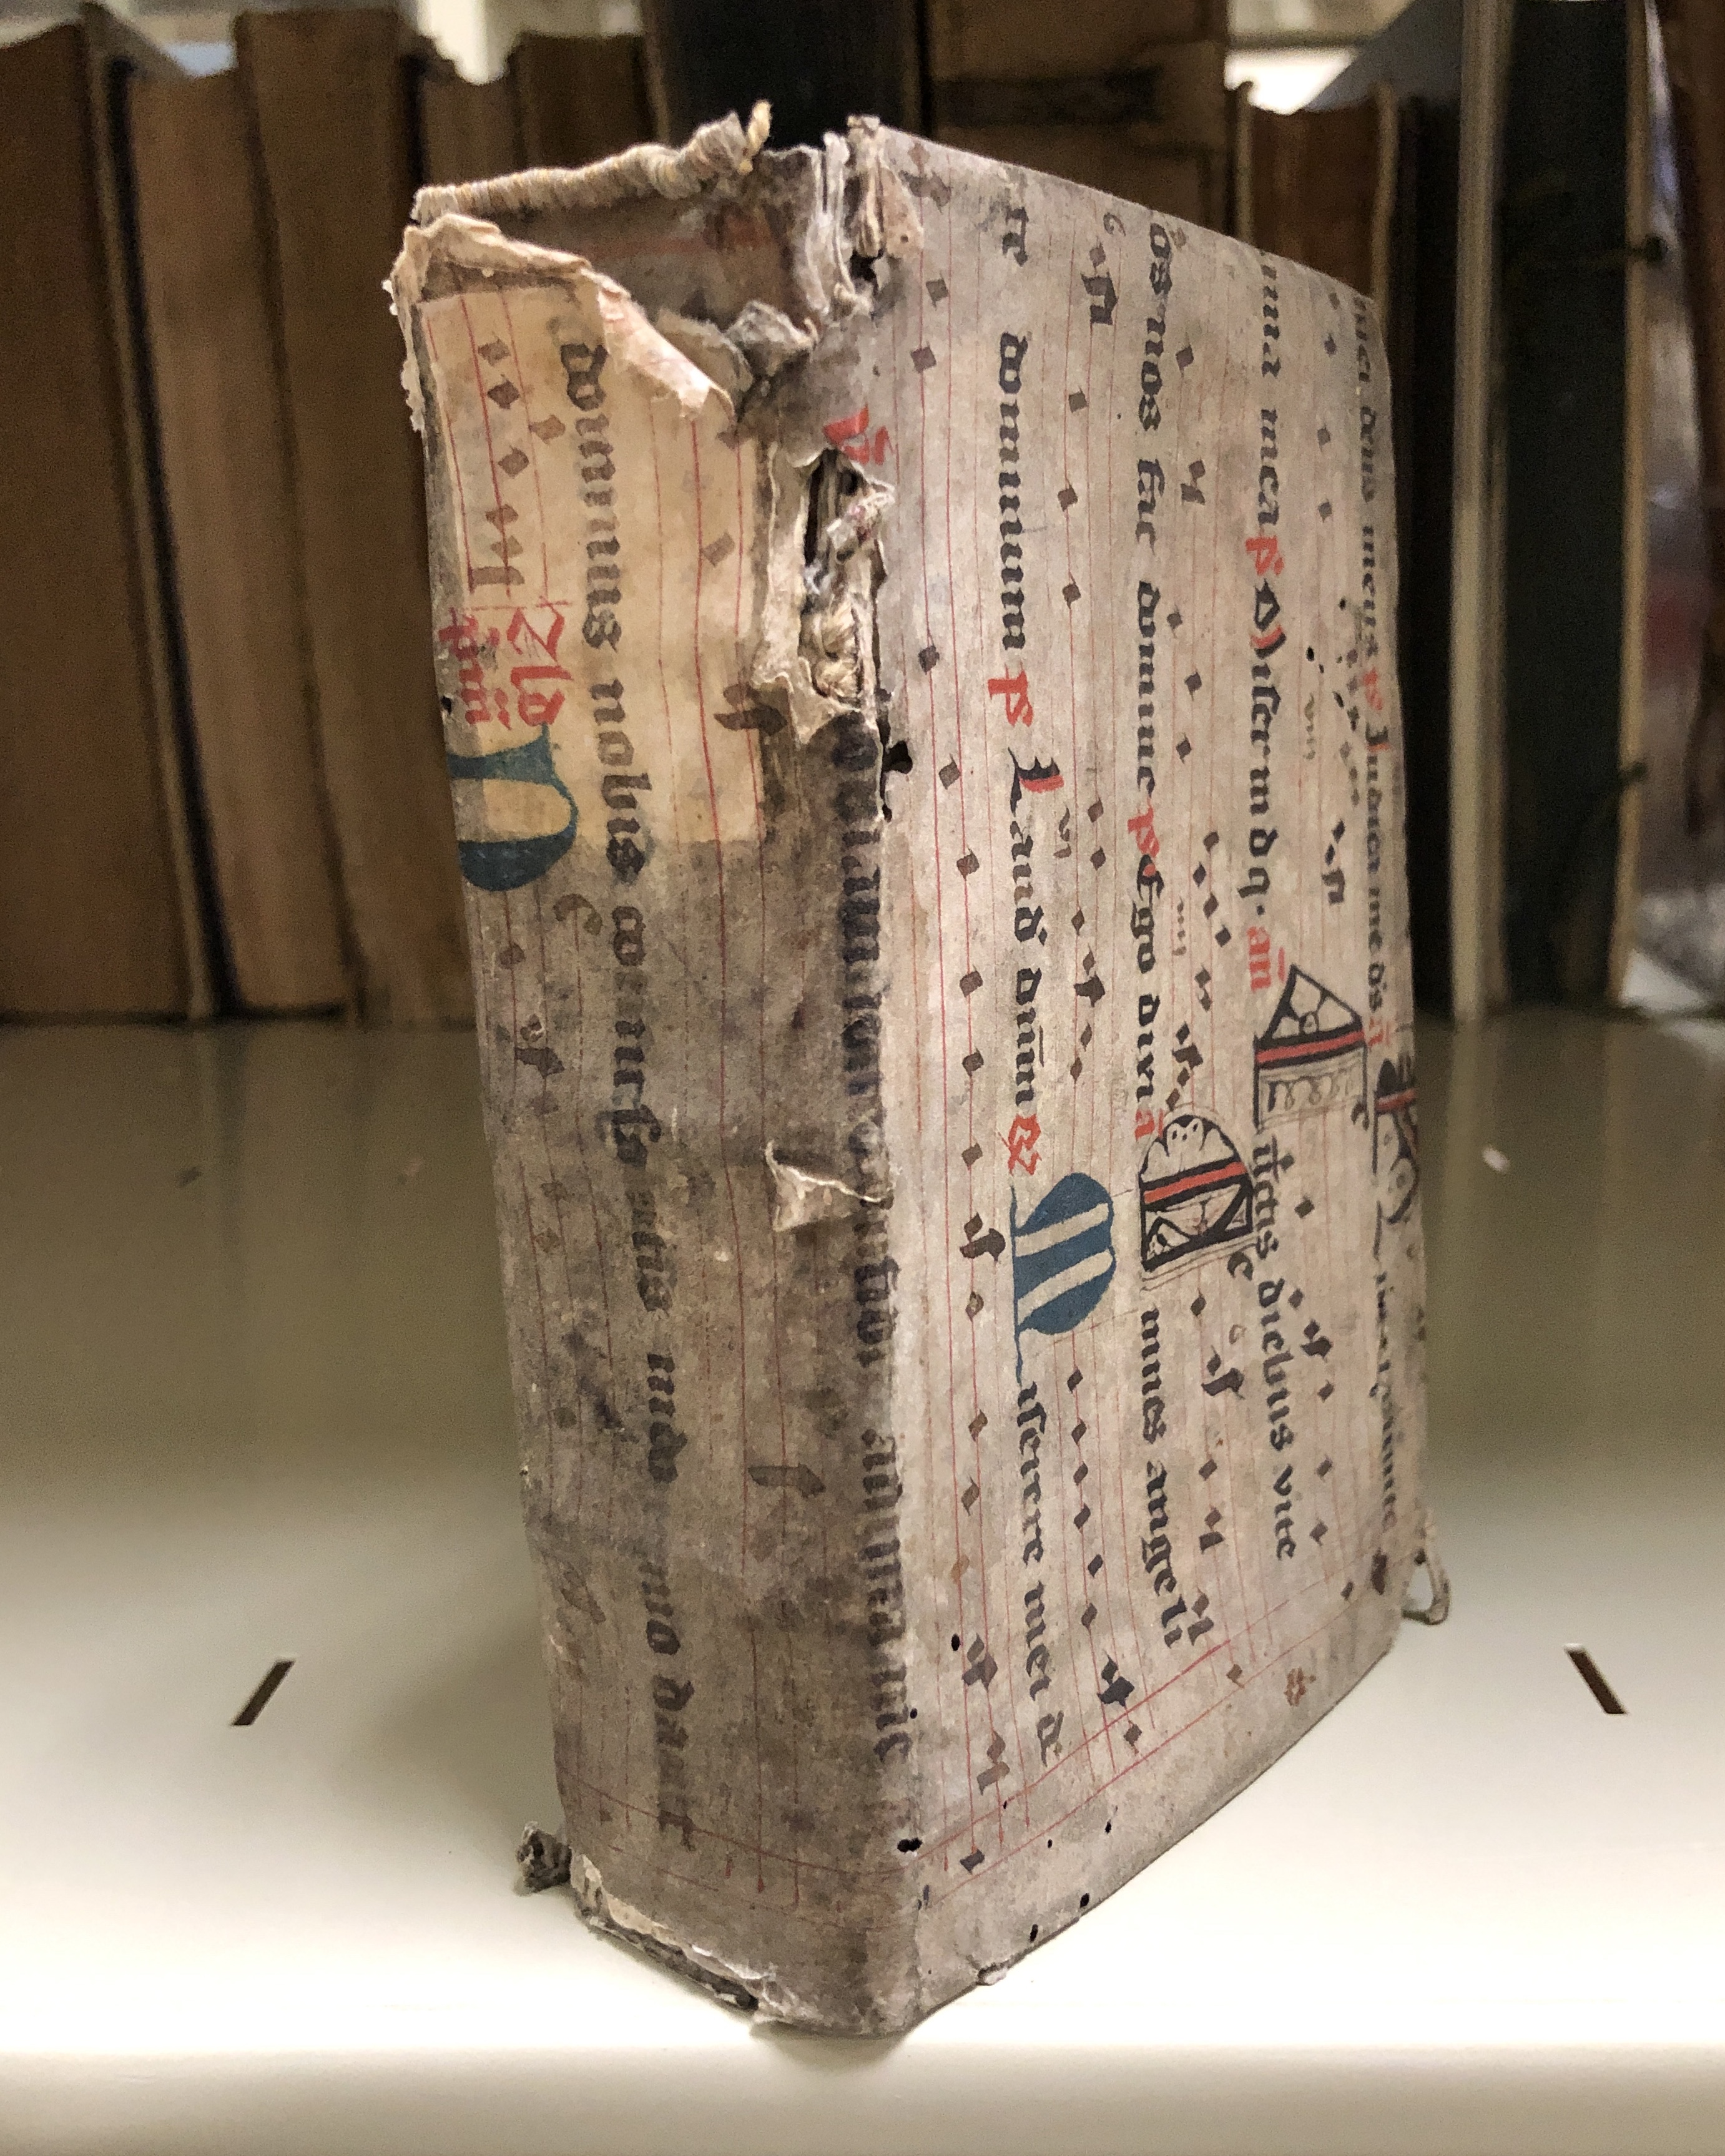 The initials, text and musical notation that cover the boards on this 1509 book, a collection of Johannes Aquilanus’ sermons, remain visible in spite of grime and bookworm damage.